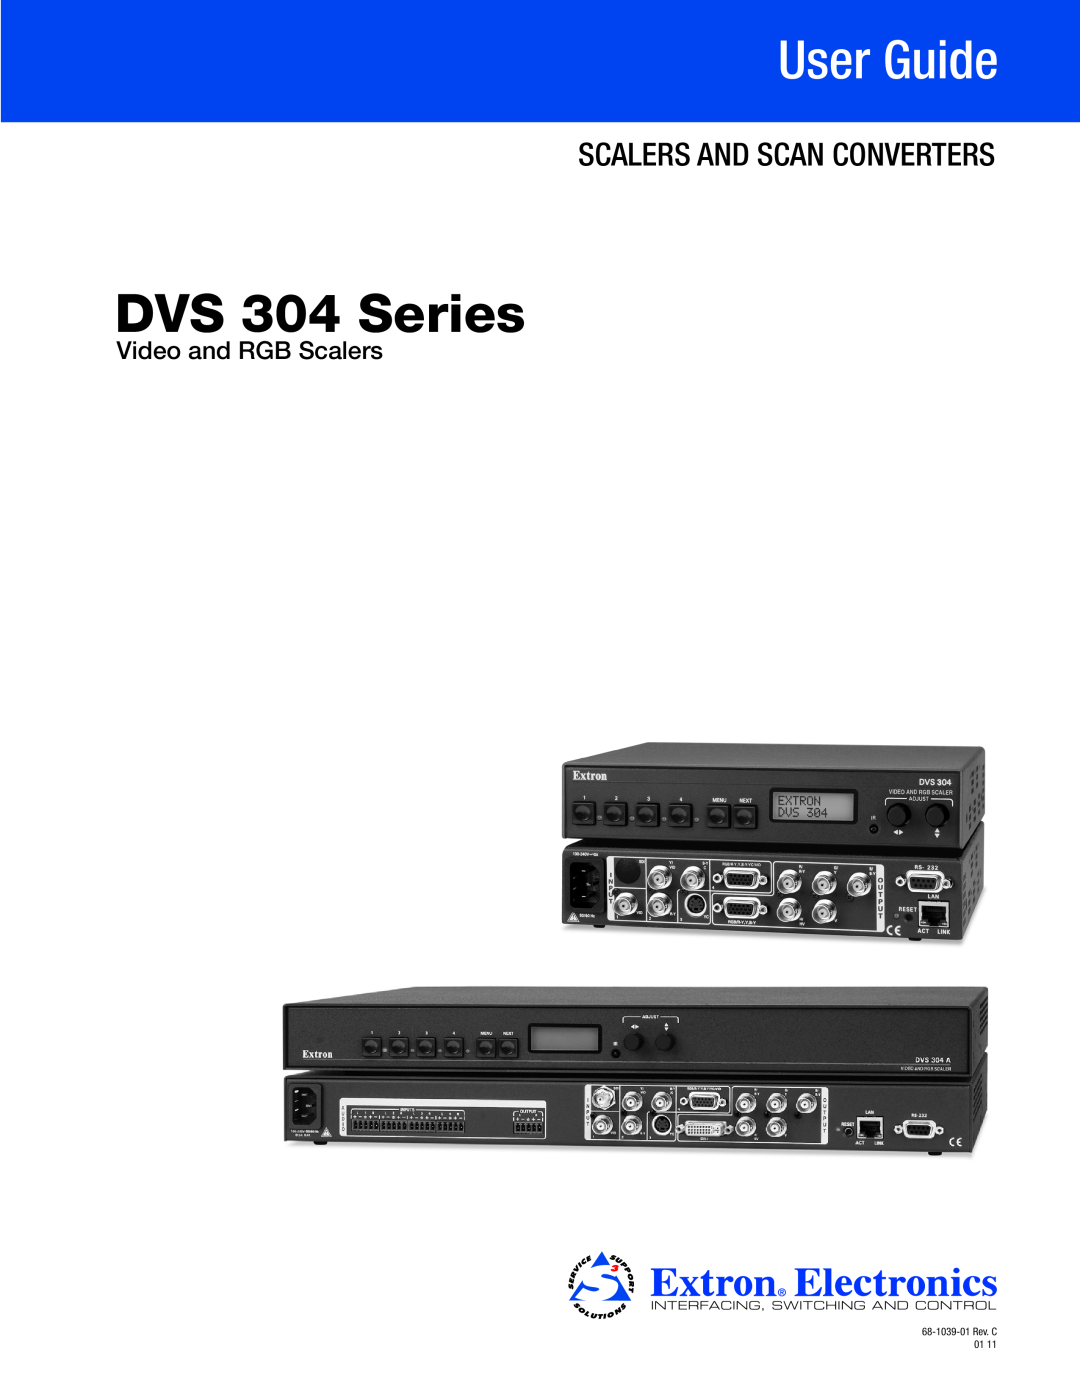 Extron electronic manual DVS 304 Series, User Guide, Scalers And Scan Converters, Video and RGB Scalers 